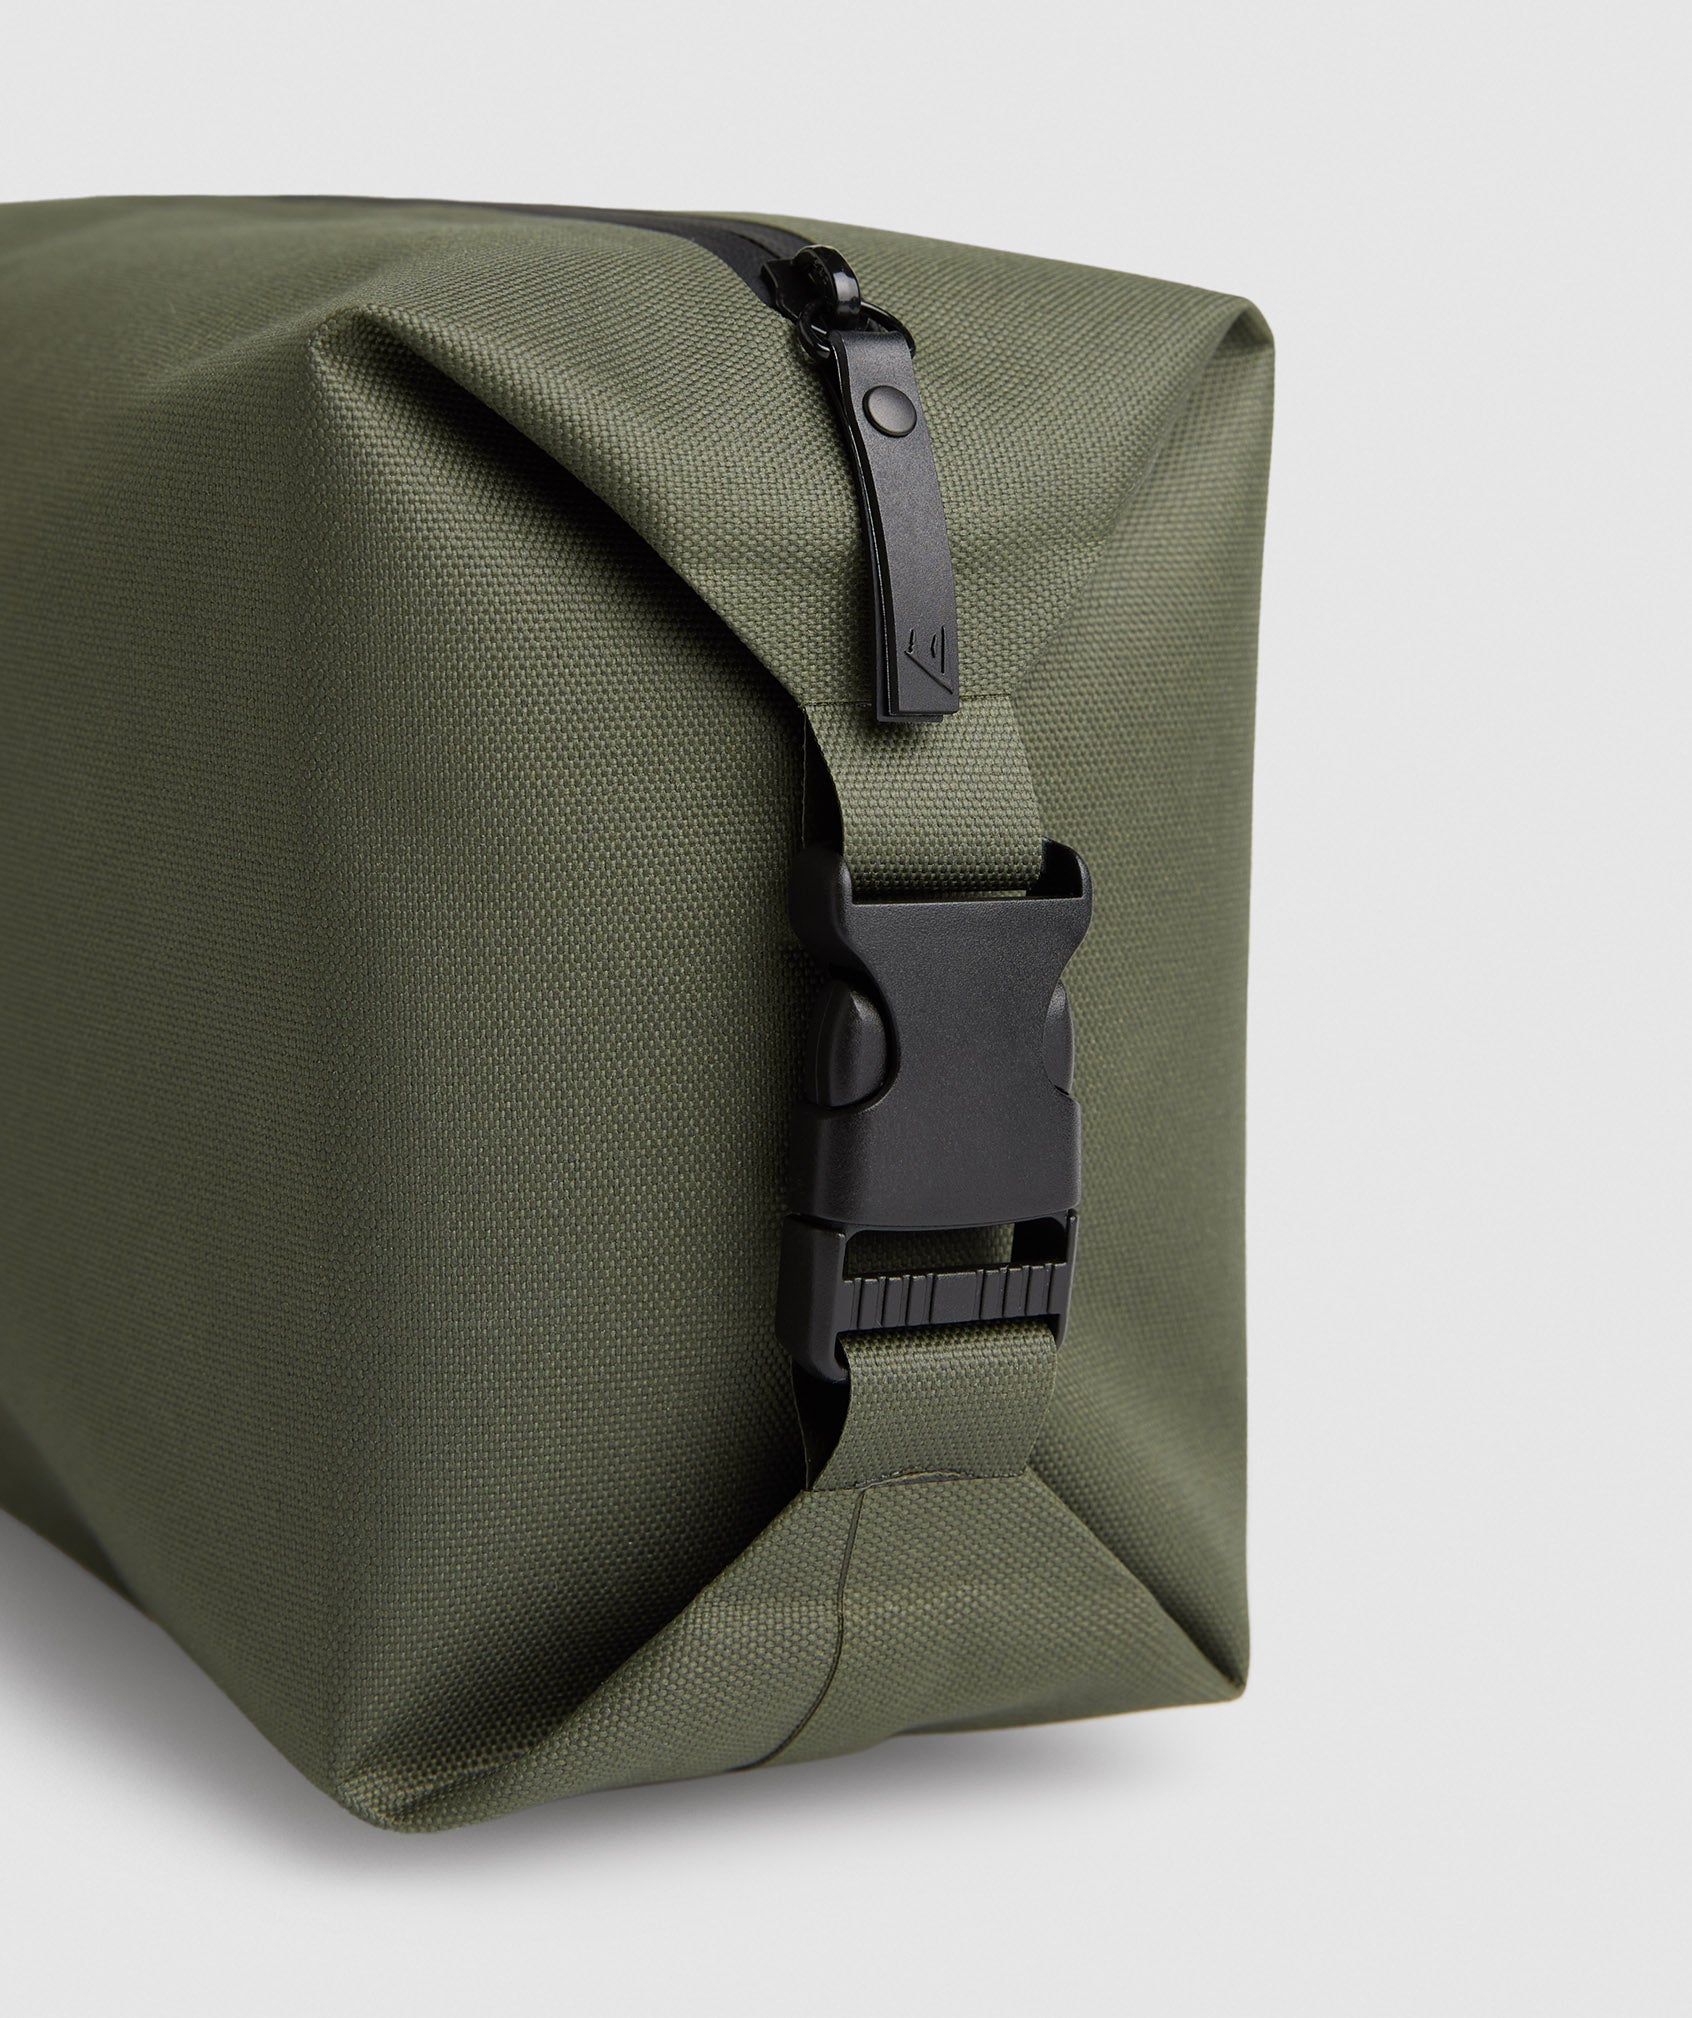 X-Series Wash Bag in Core Olive - view 2